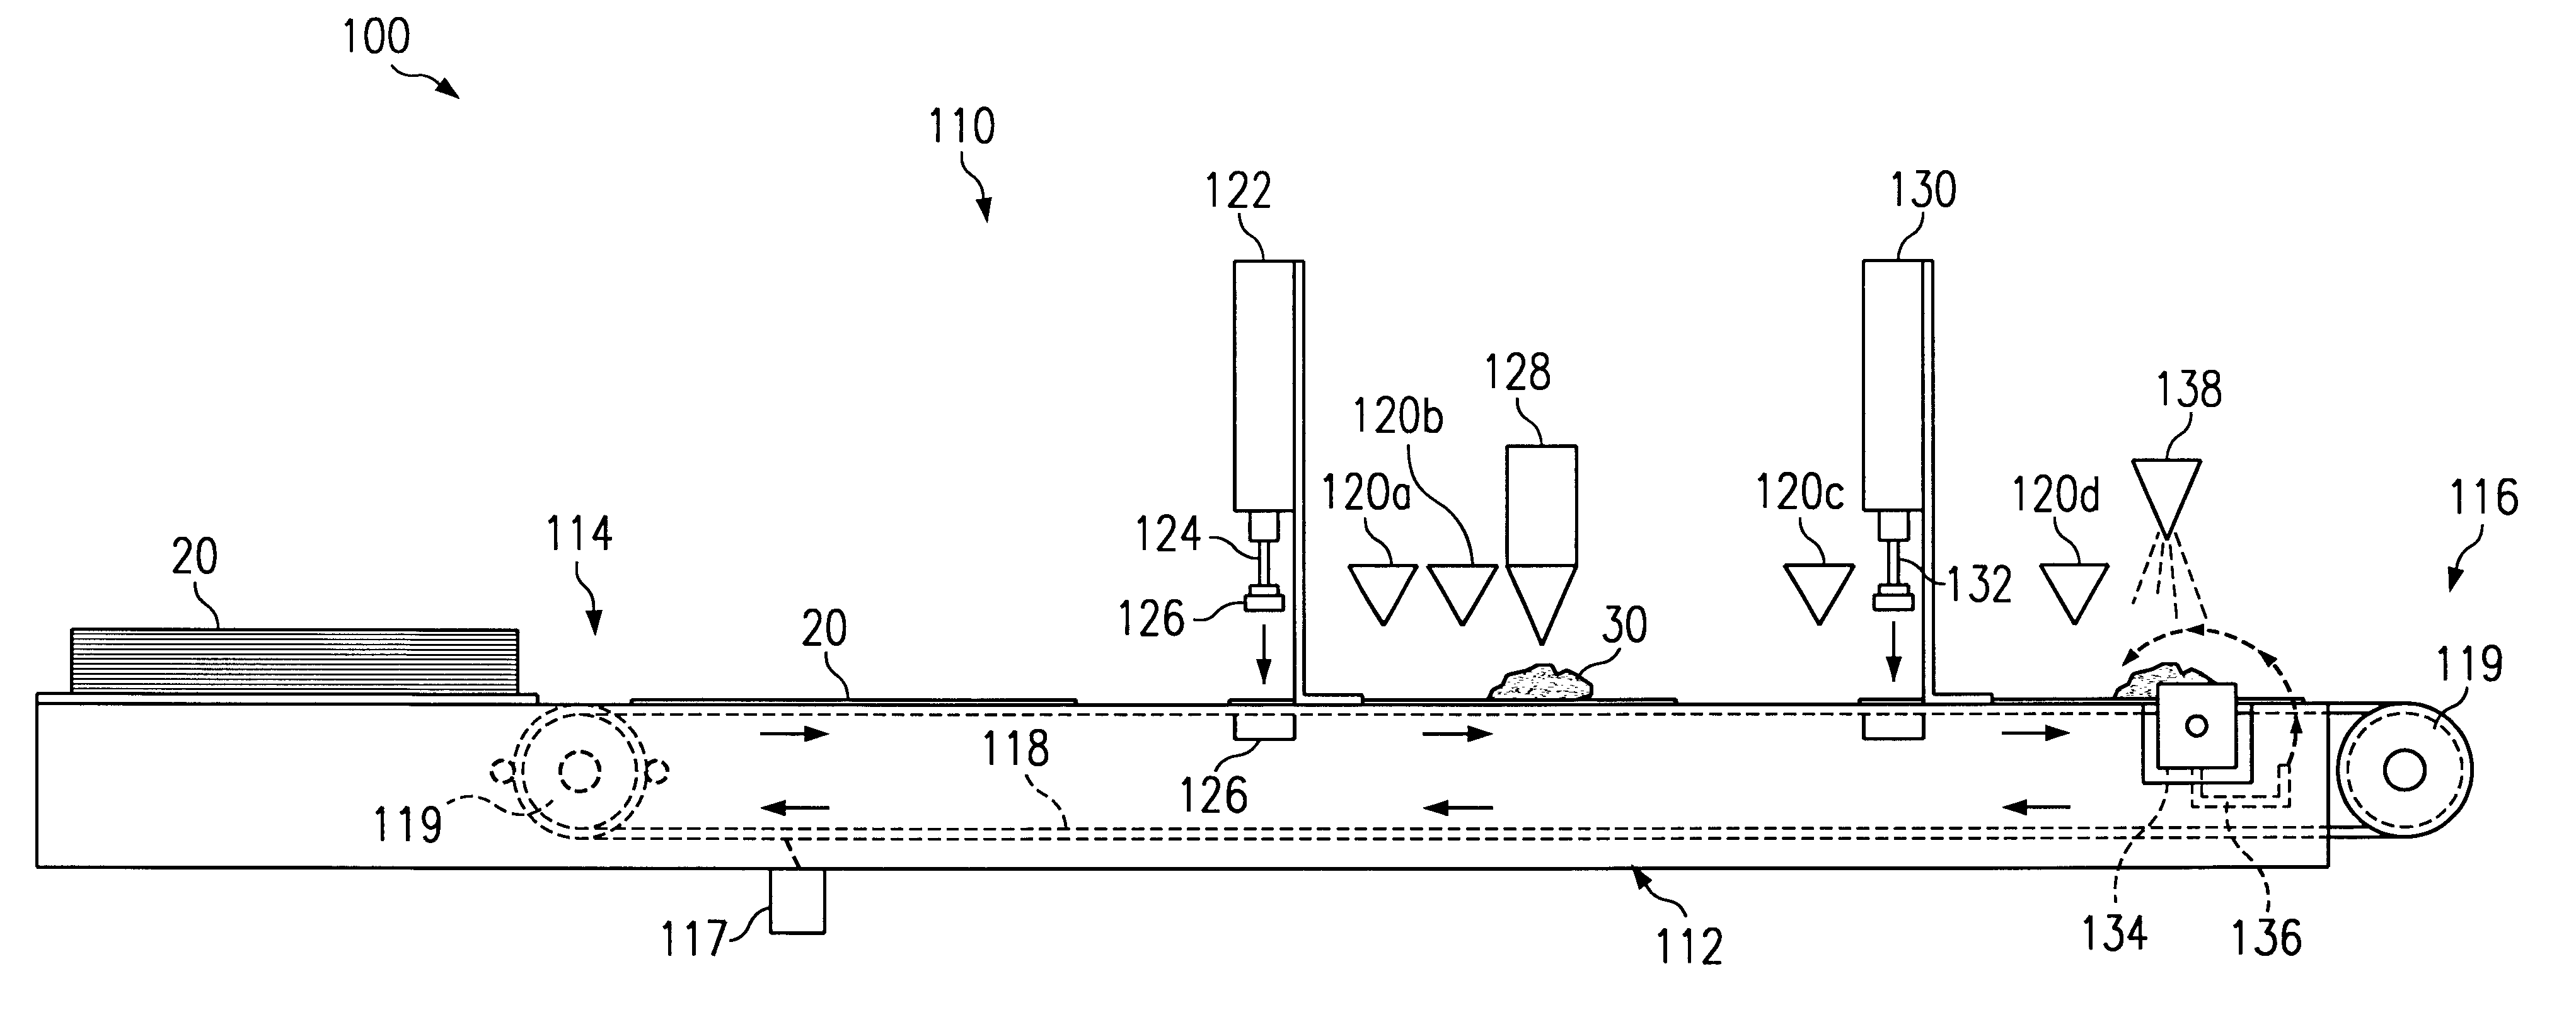 Method and apparatus for preparing a folded food product